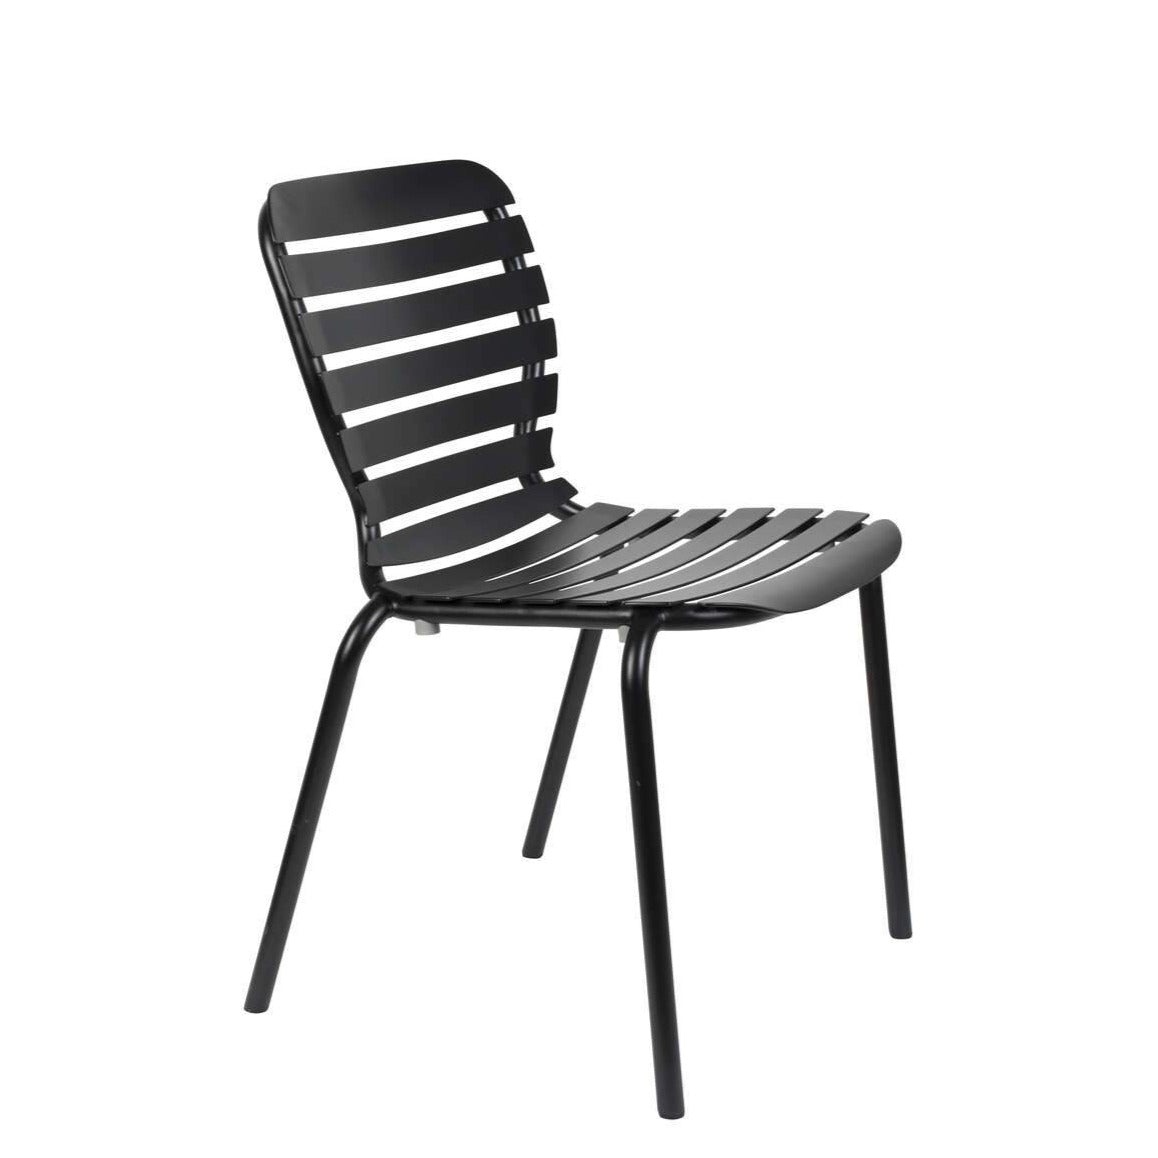 The Vondel garden chair was created for lovers of the sun, morning coffee on a modern terrace and joint Sunday dinners outside. The seat is made of the highest quality aluminum, thanks to which the furniture is resistant to weather conditions such as wind, rain and sunlight. This armchair will make a spectacle during summer meetings with friends outside.